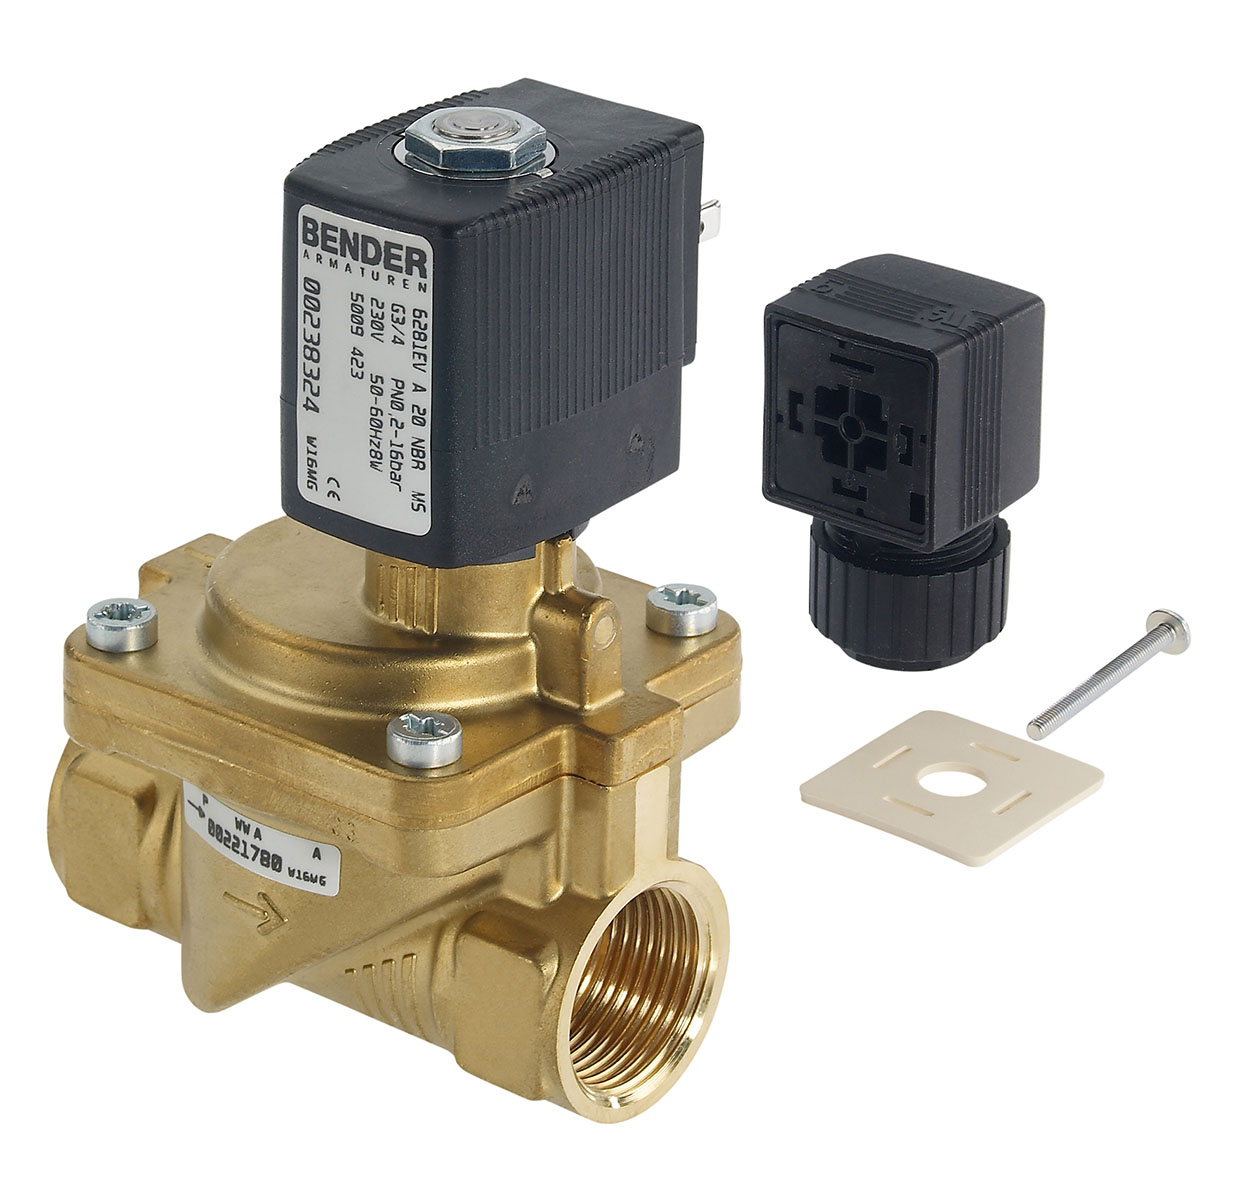 5009806 - 2/2 way solenoid valve normally closed for fluids Type 8; female thread